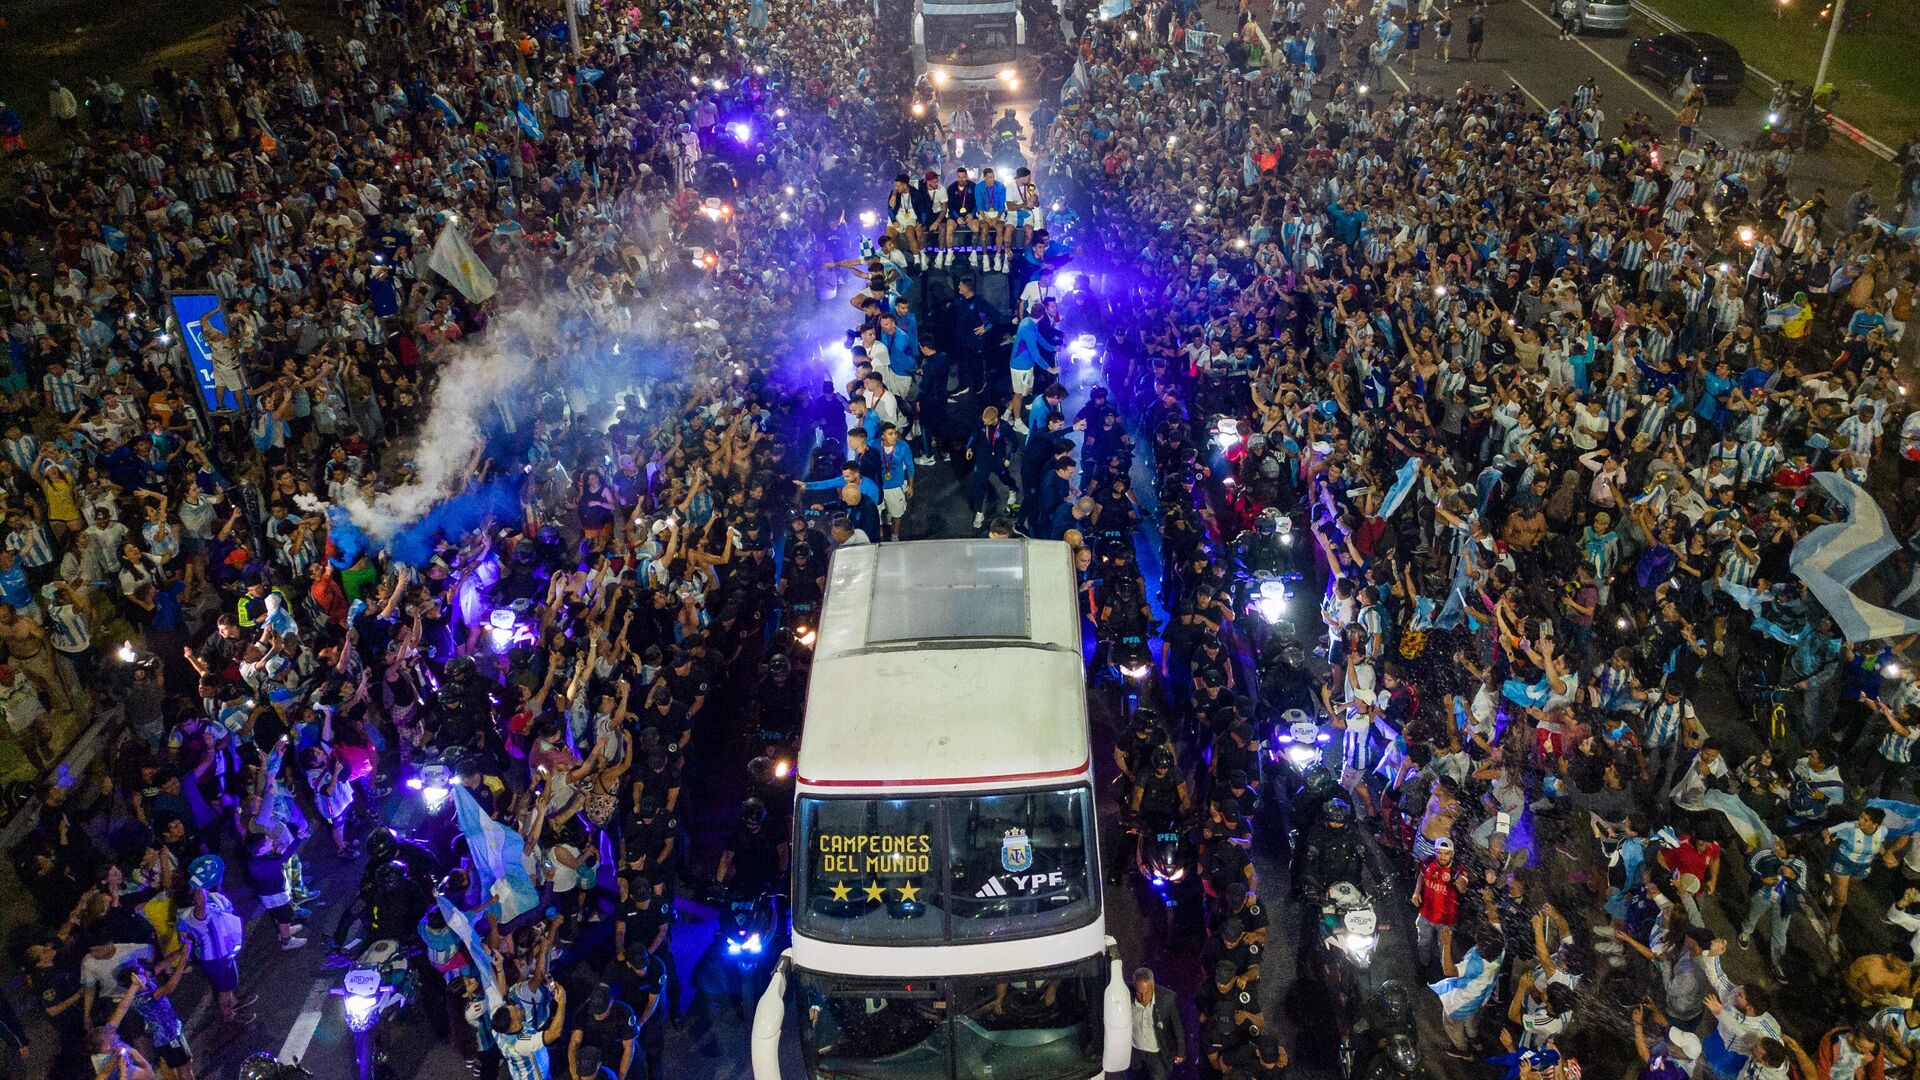 Argentina's players celebrate on board a bus with supporters after winning the Qatar 2022 World Cup tournament as they leave Ezeiza International Airport en route to the Argentine Football Association (AFA) training centre in Ezeiza, Buenos Aires province, Argentina on December 20, 2022. - Sputnik India, 1920, 31.12.2022